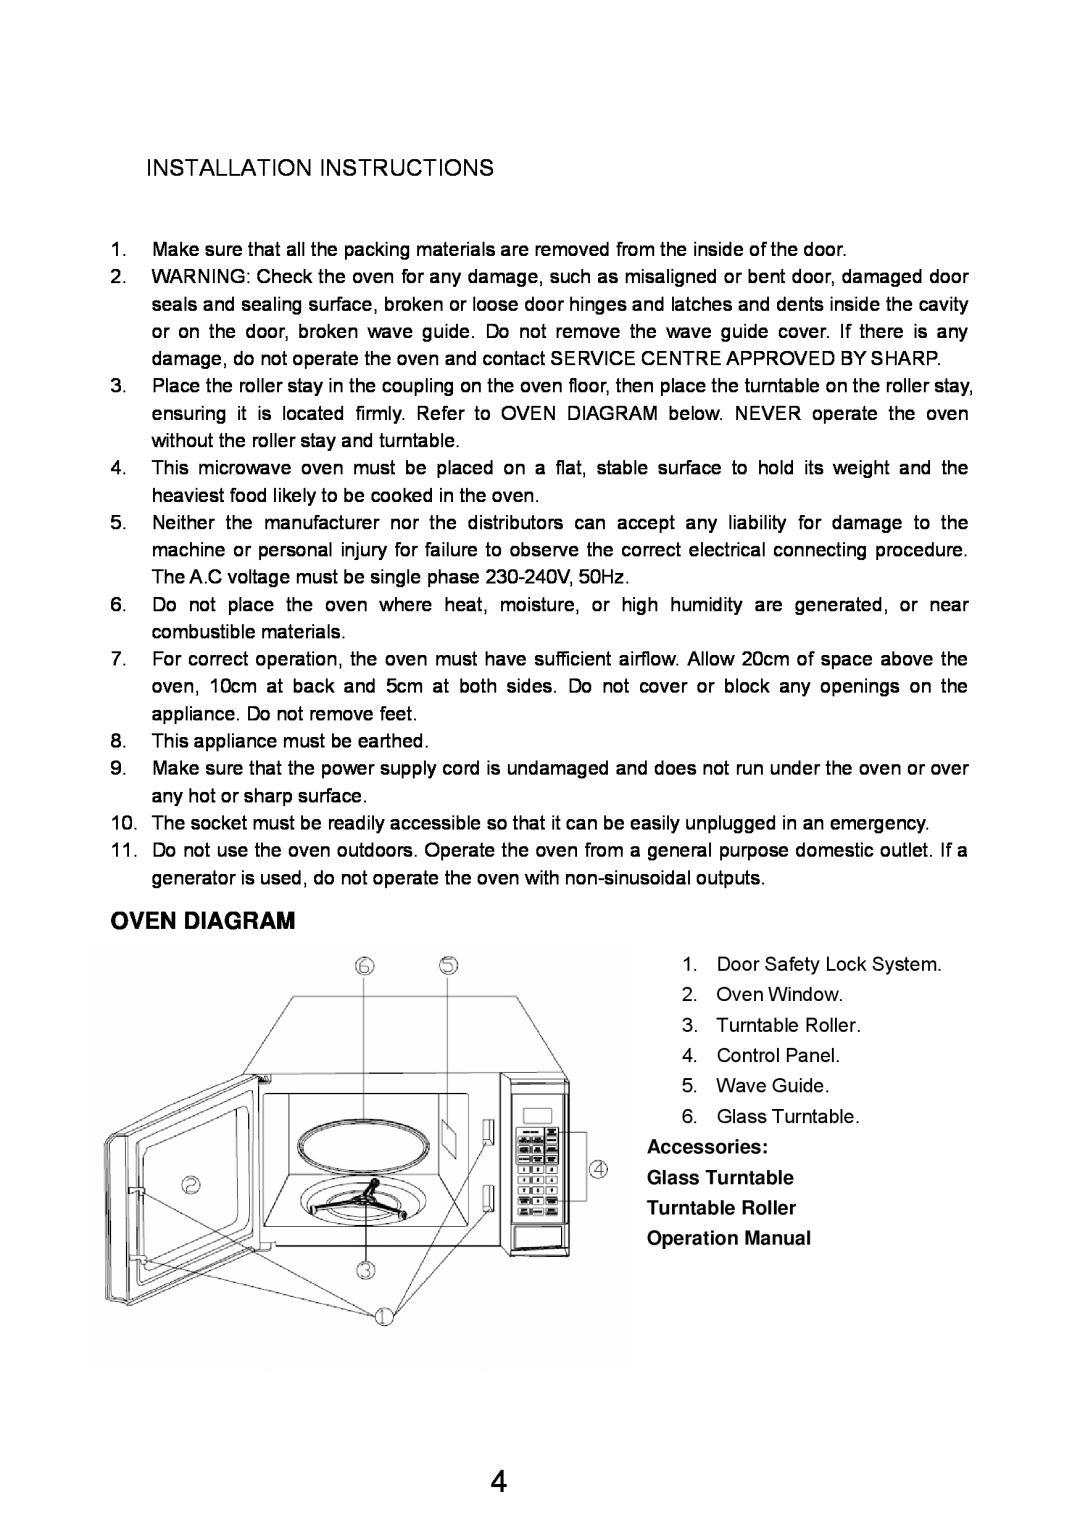 Sharp Microwave Oven manual Oven Diagram, Installation Instructions 